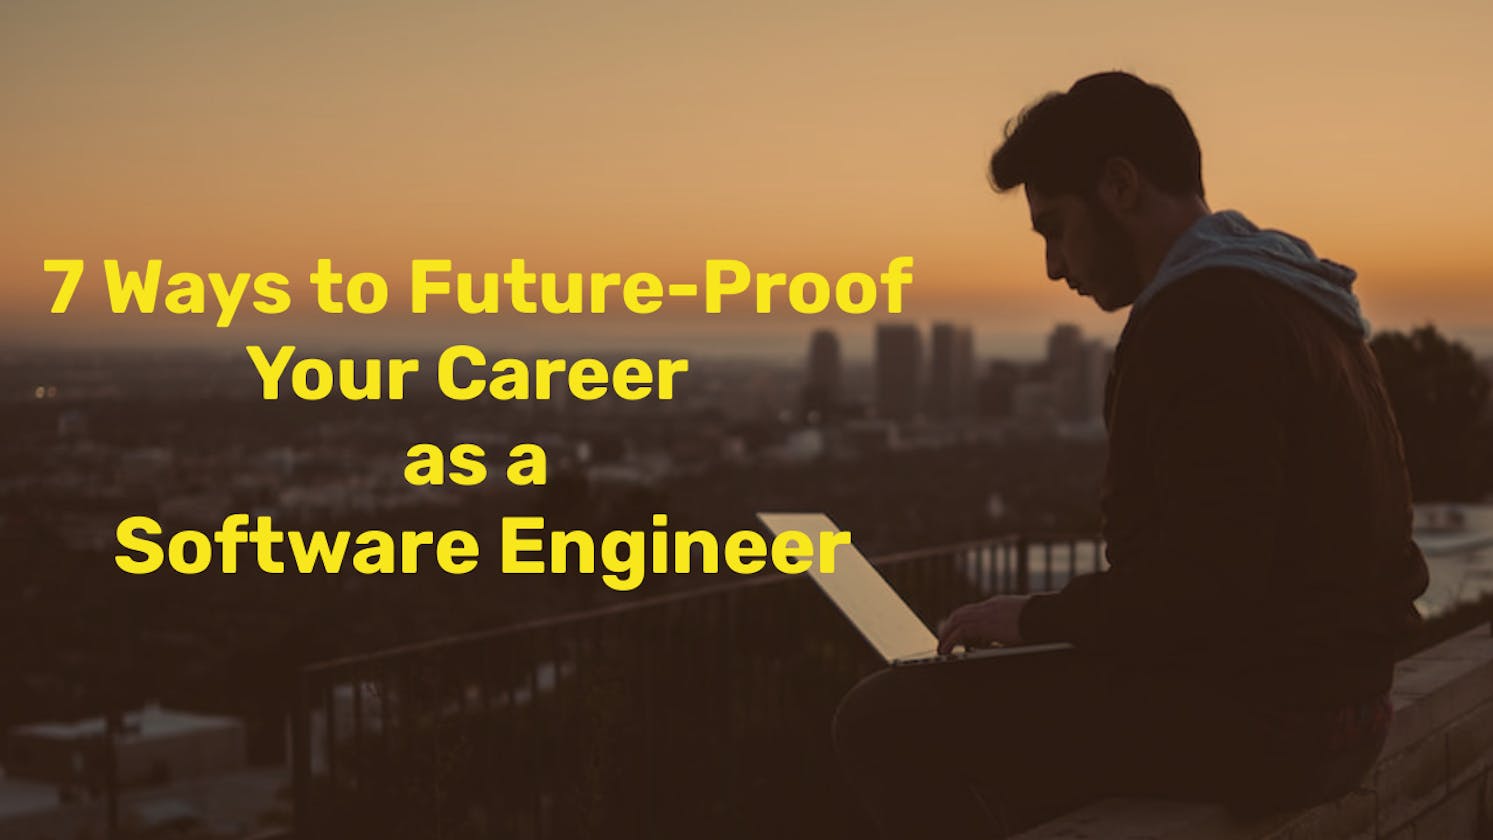 7 Ways to Future-Proof Your Career as a Software Engineer